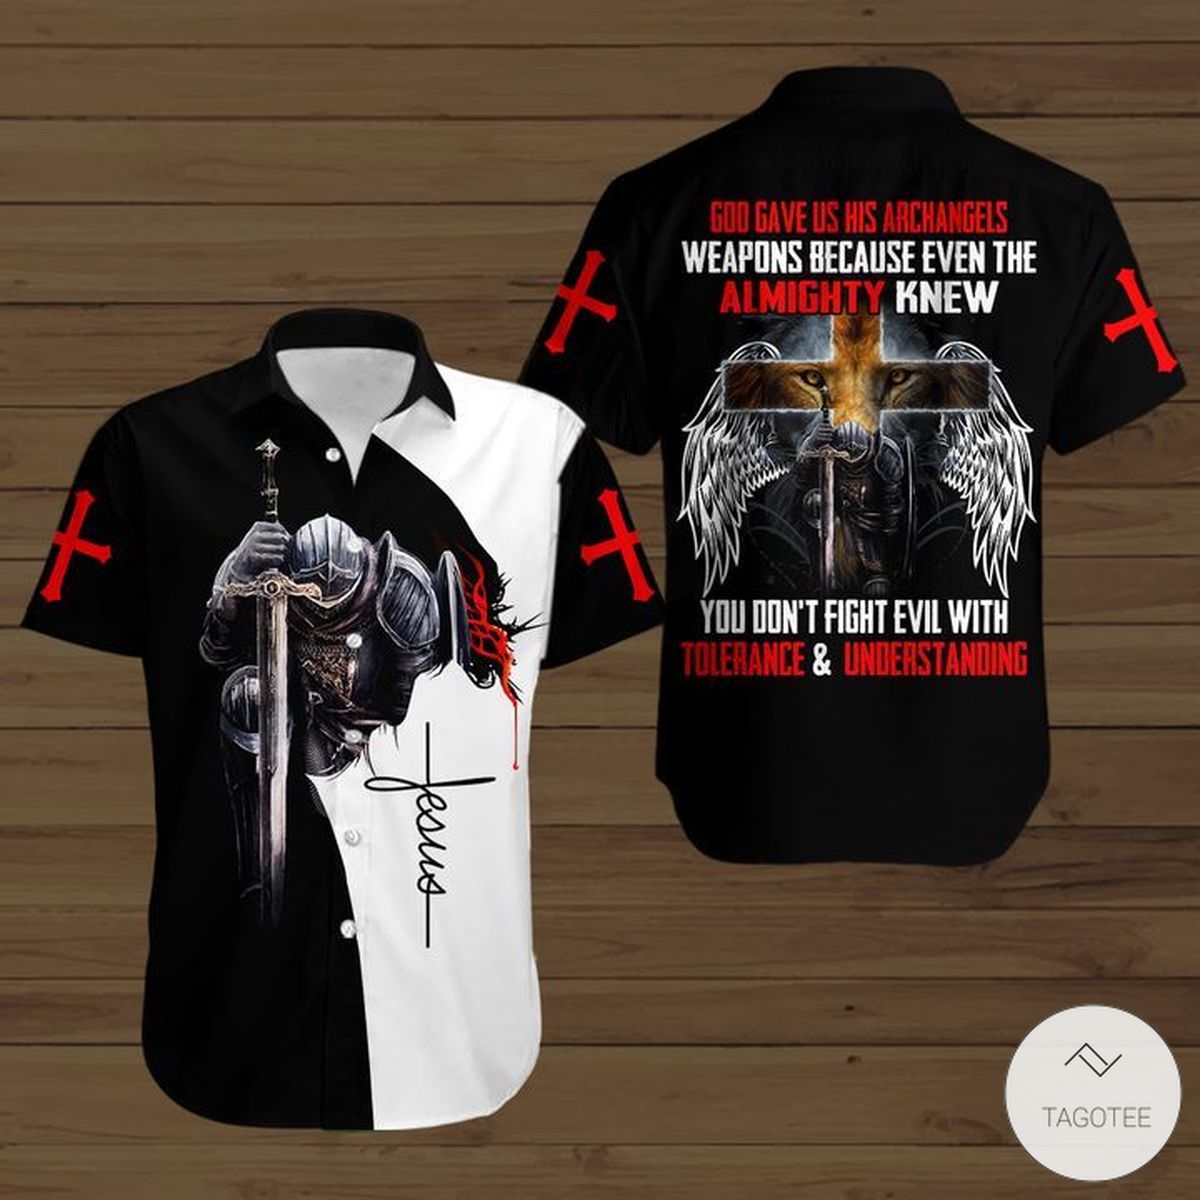 God-Gave-His-Archangels-Weapons-Because-Even-The-Almighty-Knew-Button-Shirt